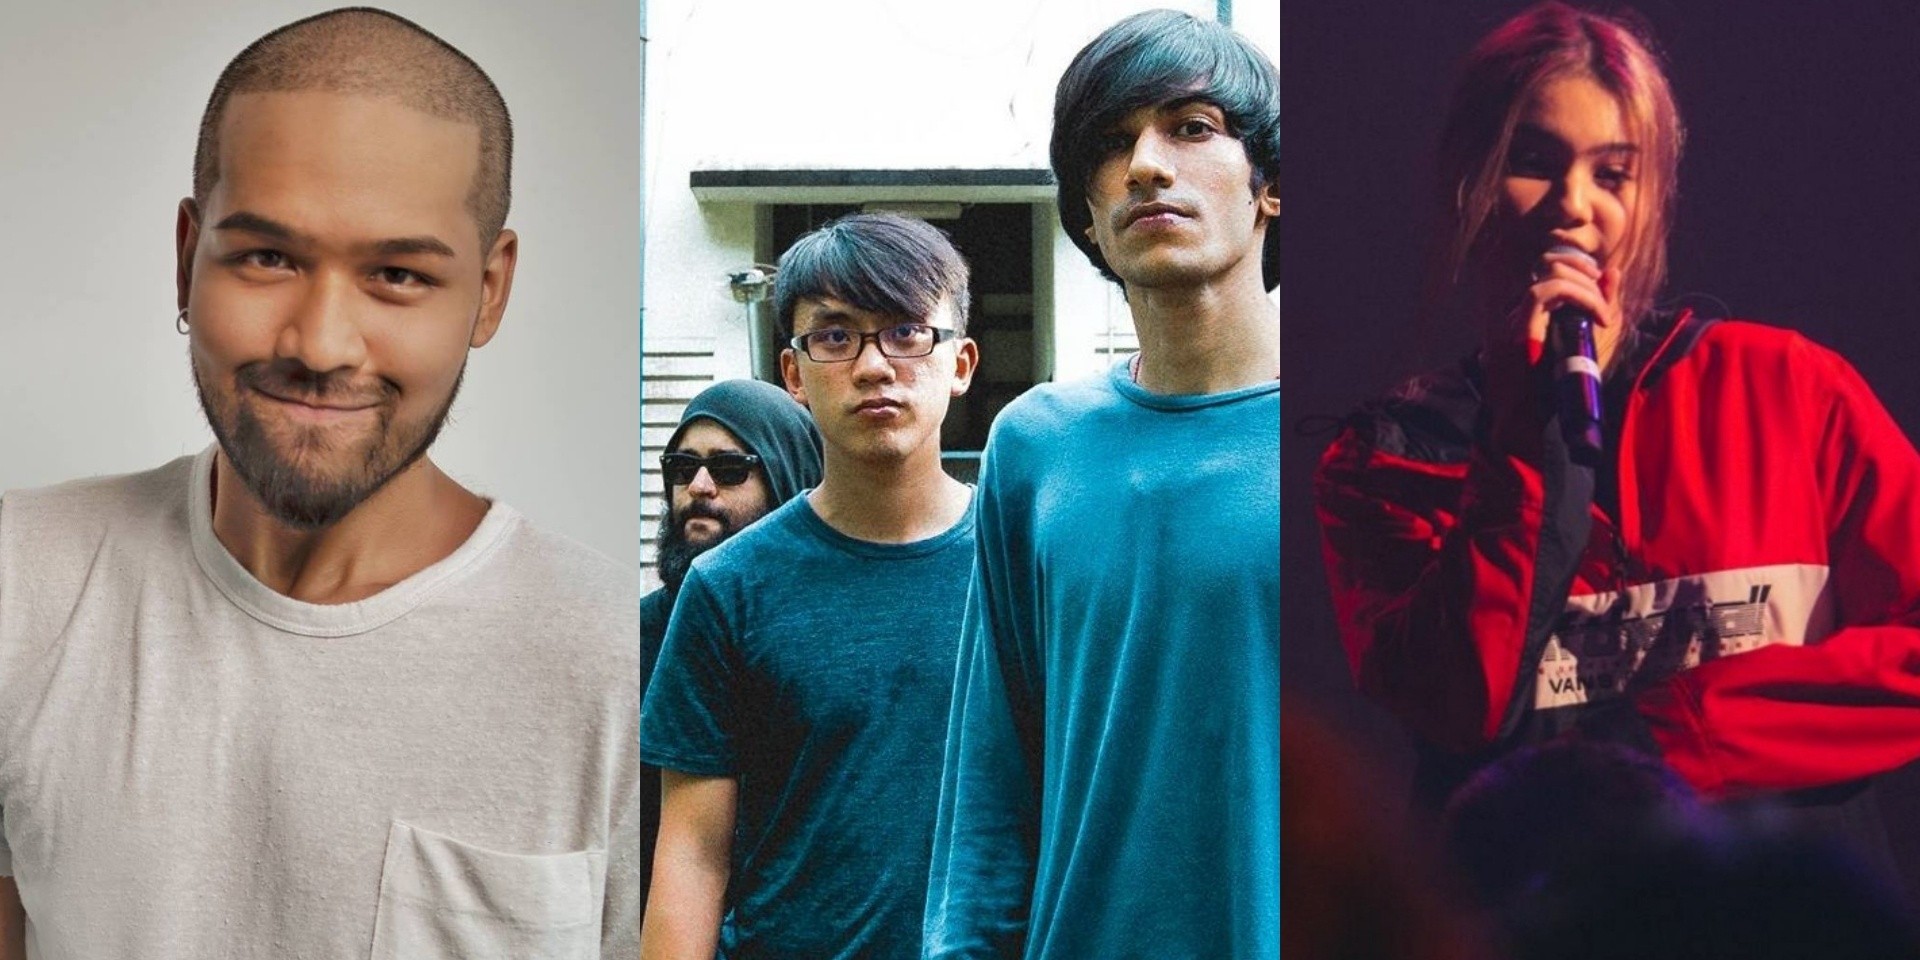 WHABBY! Music Carnival 2019 announces first wave lineup: Joshua Simon, Knightingale, Shye and more confirmed